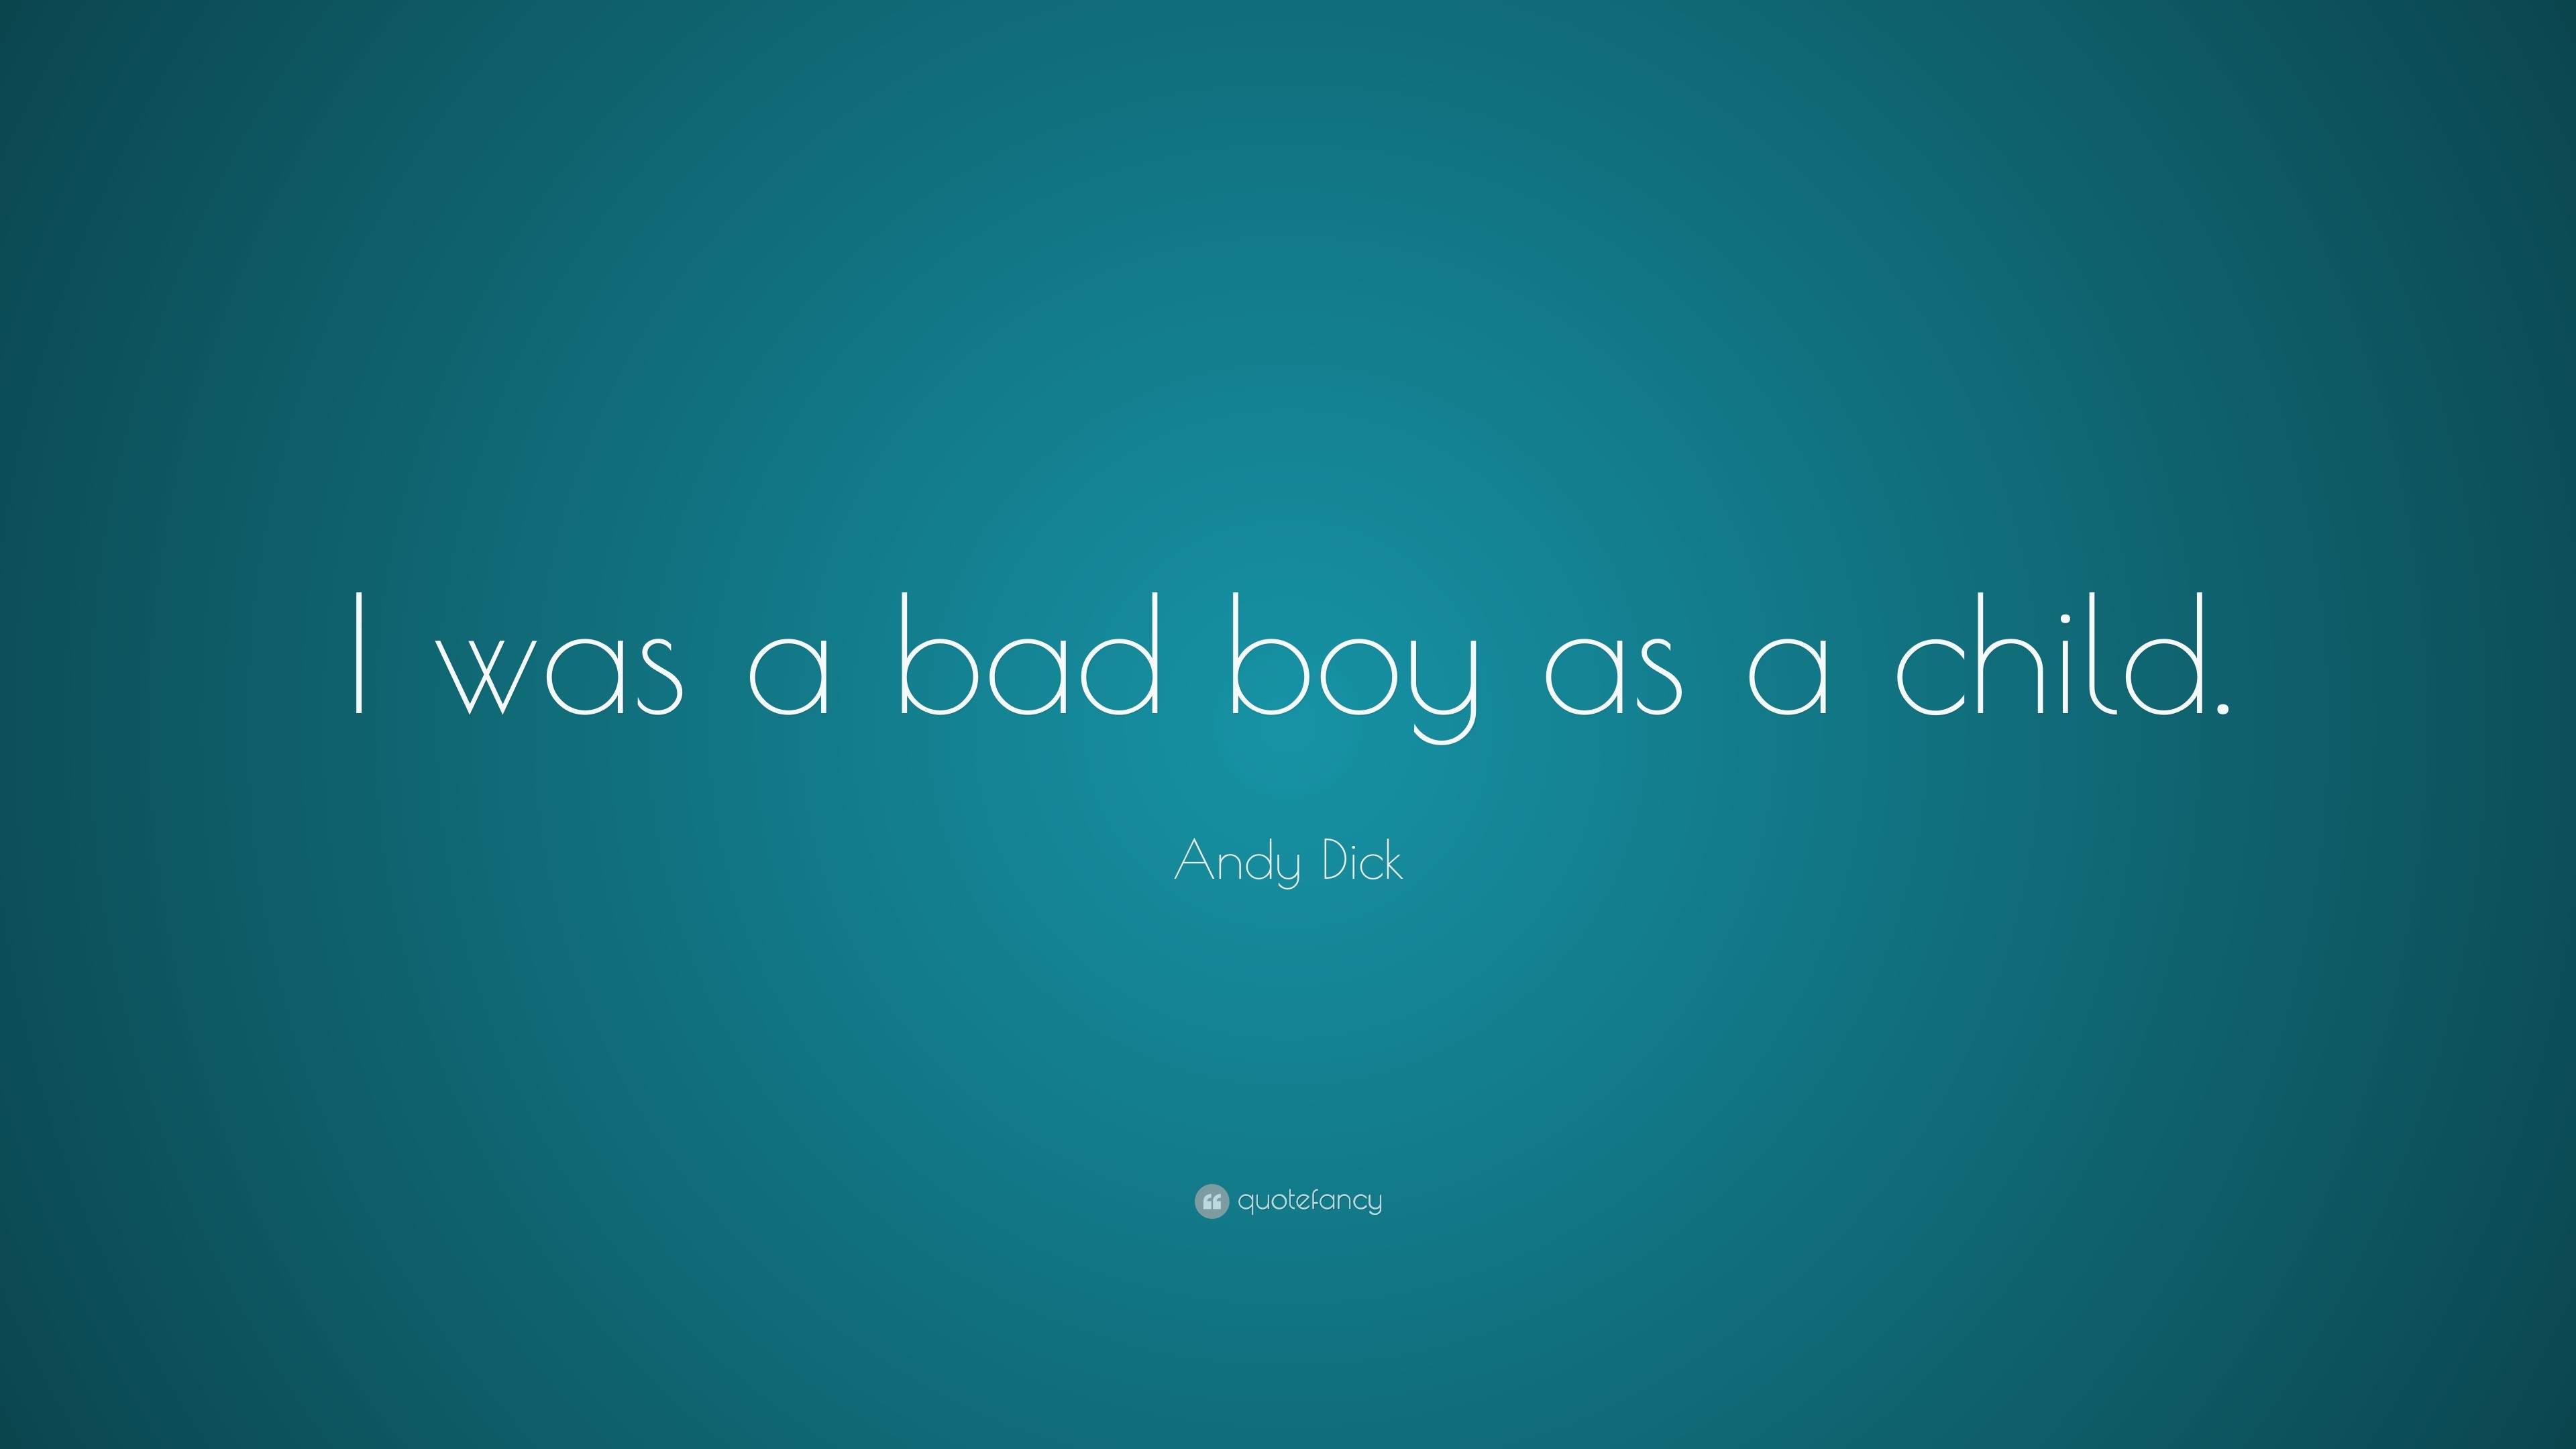 3840x2160 Andy Dick Quote: “I was a bad boy as a child.”